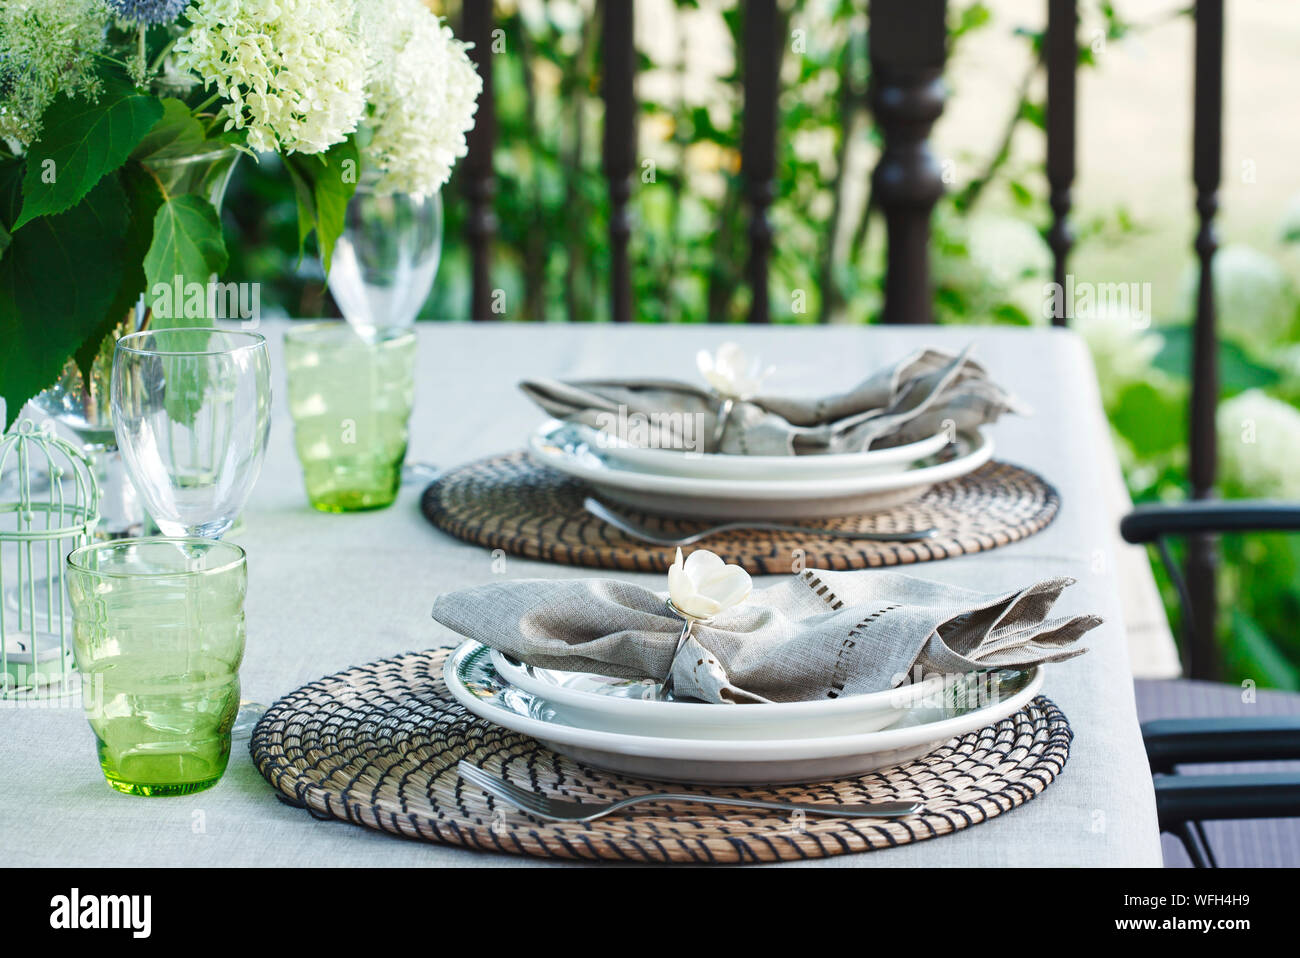 Formal table setting outdoors Stock Photo